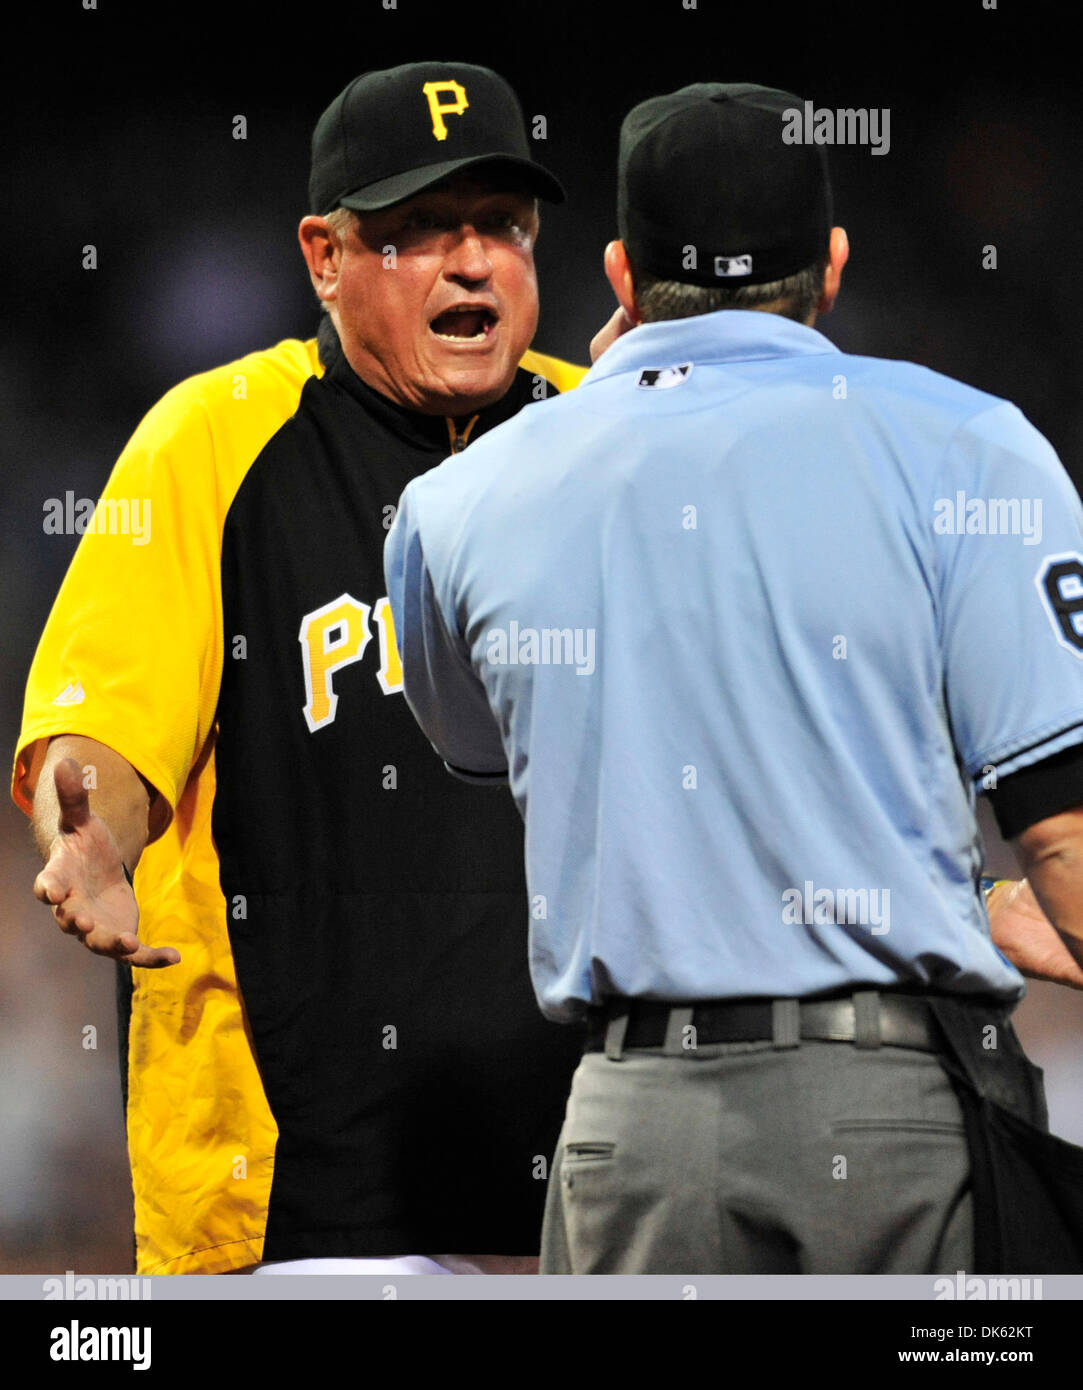 May 21, 2011 - Pittsburgh, Pennsylvania, U.S - 21 May 2011: Pittsburgh Pirate manager Clint Hurdle (left) argues a called 3rd strike by home plate umpire Chris Guccione (#6) in the game against the Detroit Tigers at PNC Park in Pittsburgh Pennsylvania. Pittsburgh Pirates defeated the Detroit Tigers 6-2. (Credit Image: © Paul Lindenfelser/Southcreek Global/ZUMAPRESS.com) Stock Photo